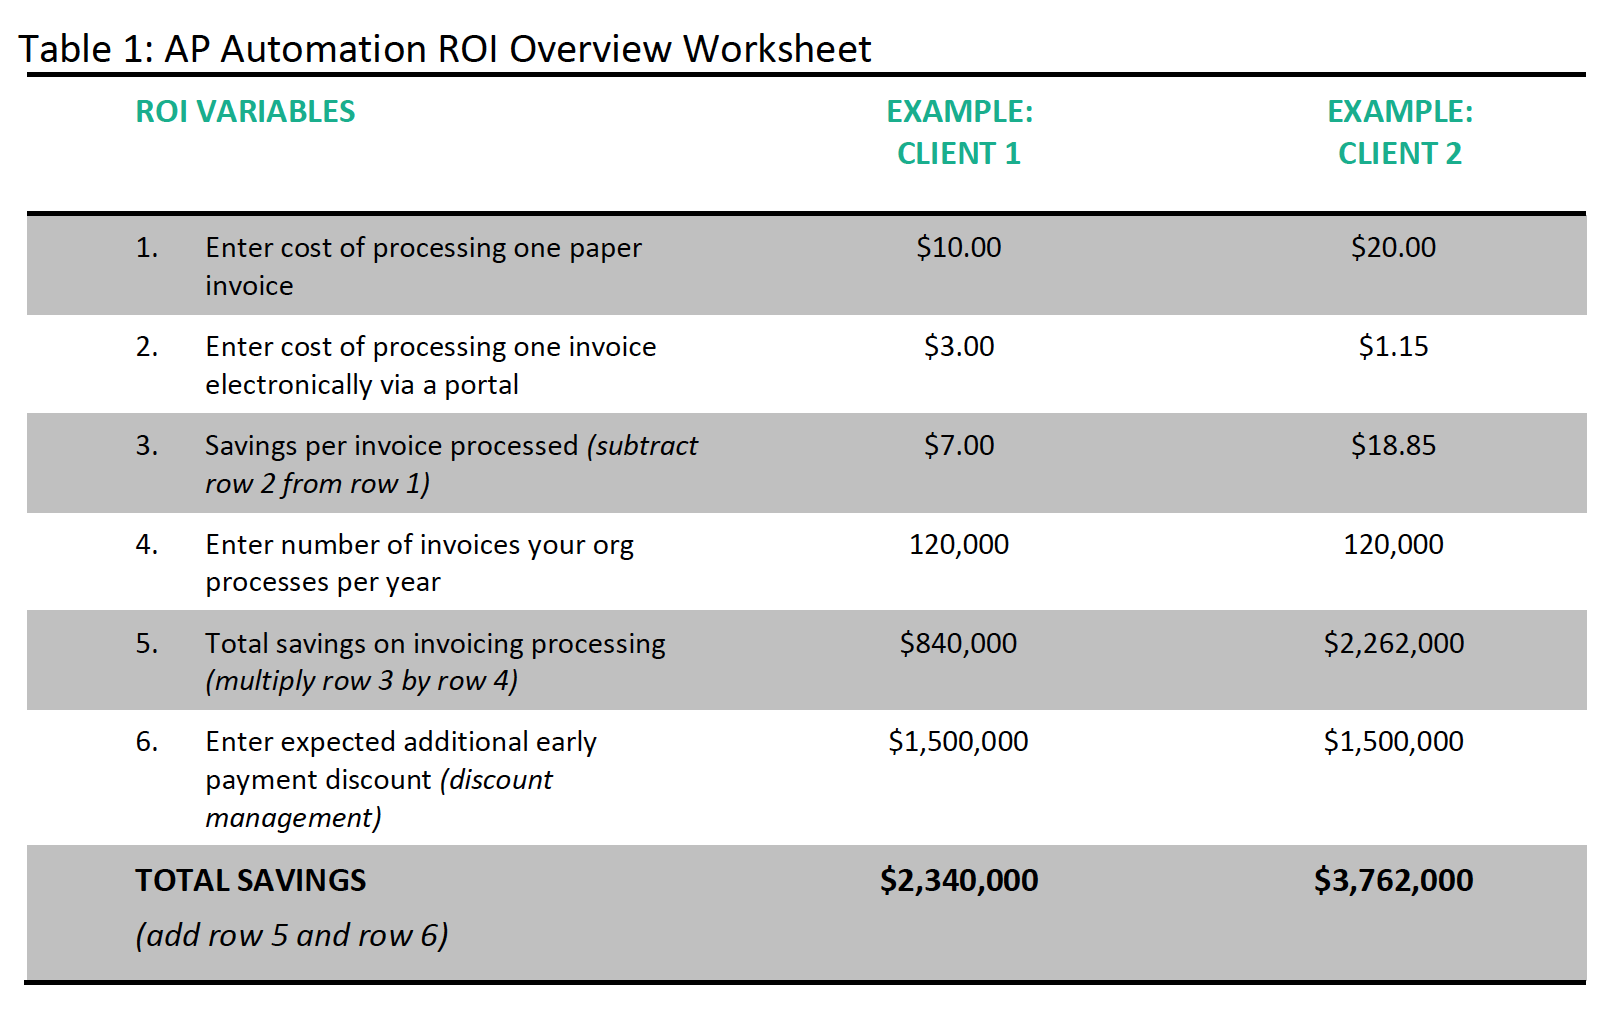 Direct Commerce's AP Automation ROI Overview Worksheet